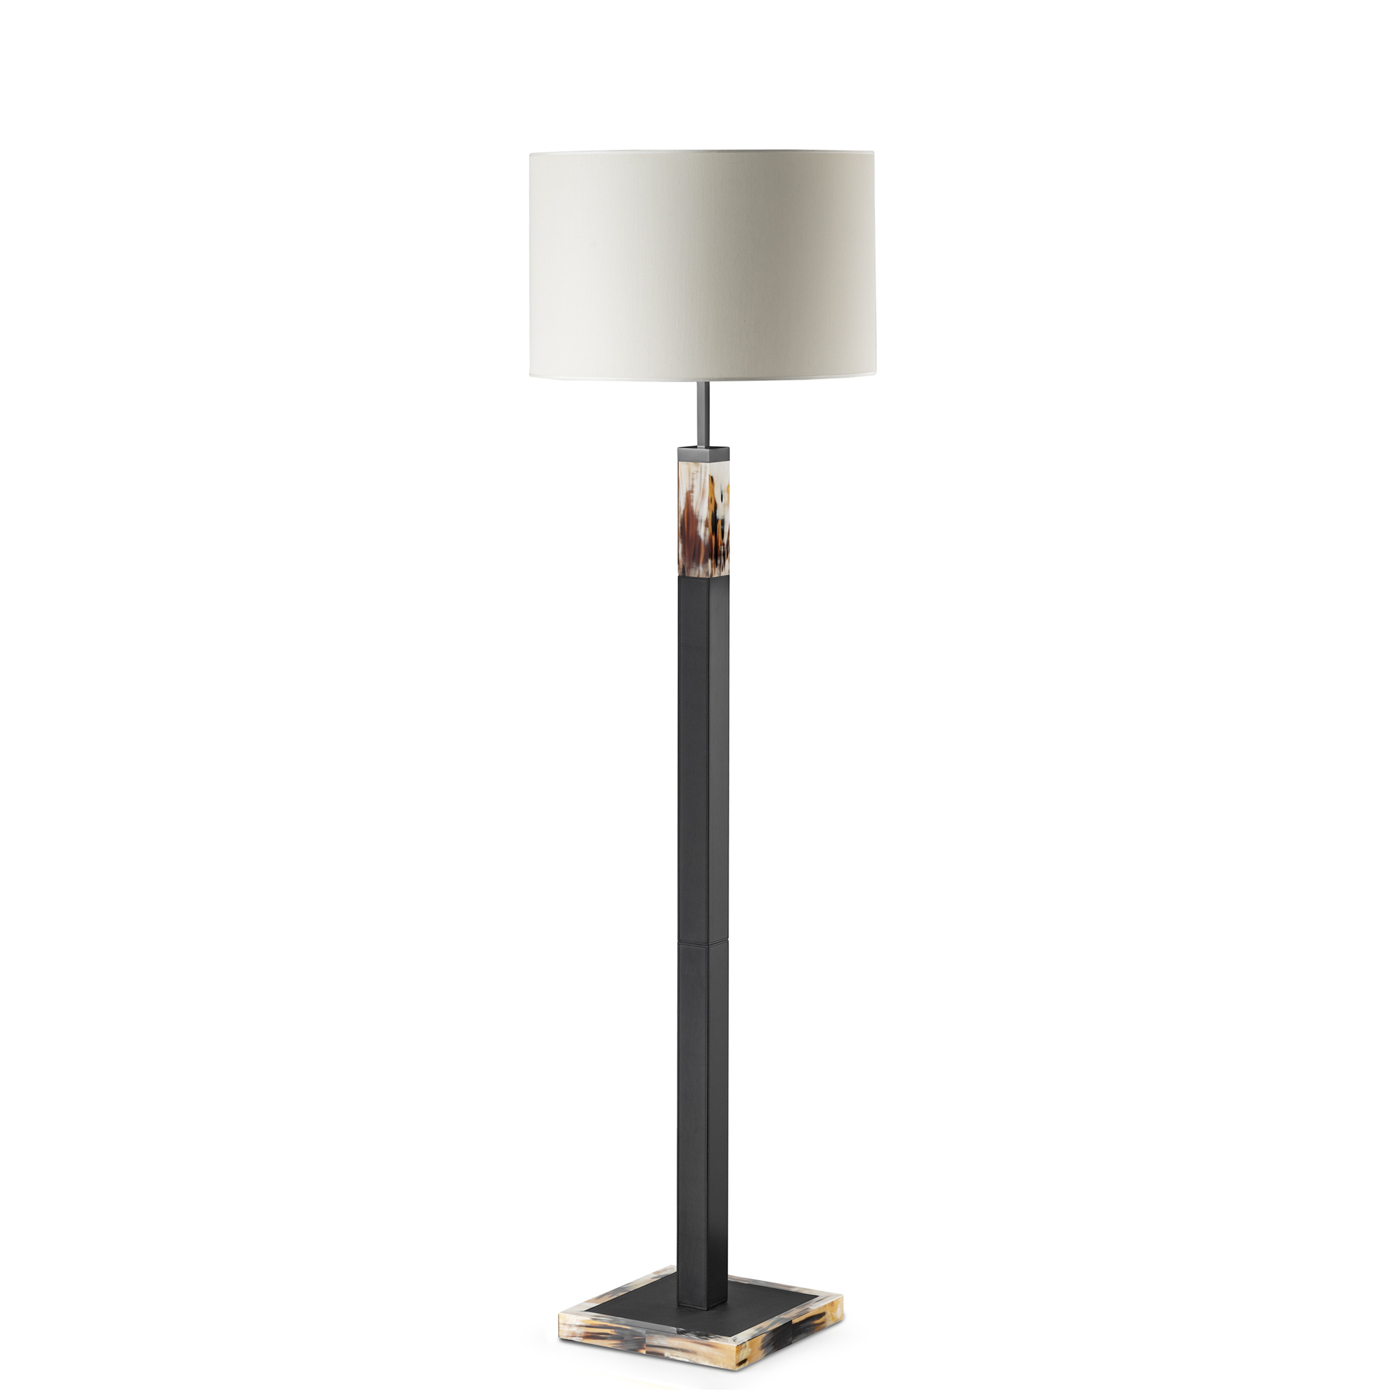 Lamps - Alma floor lamp in black leather and horn - Arcahorn